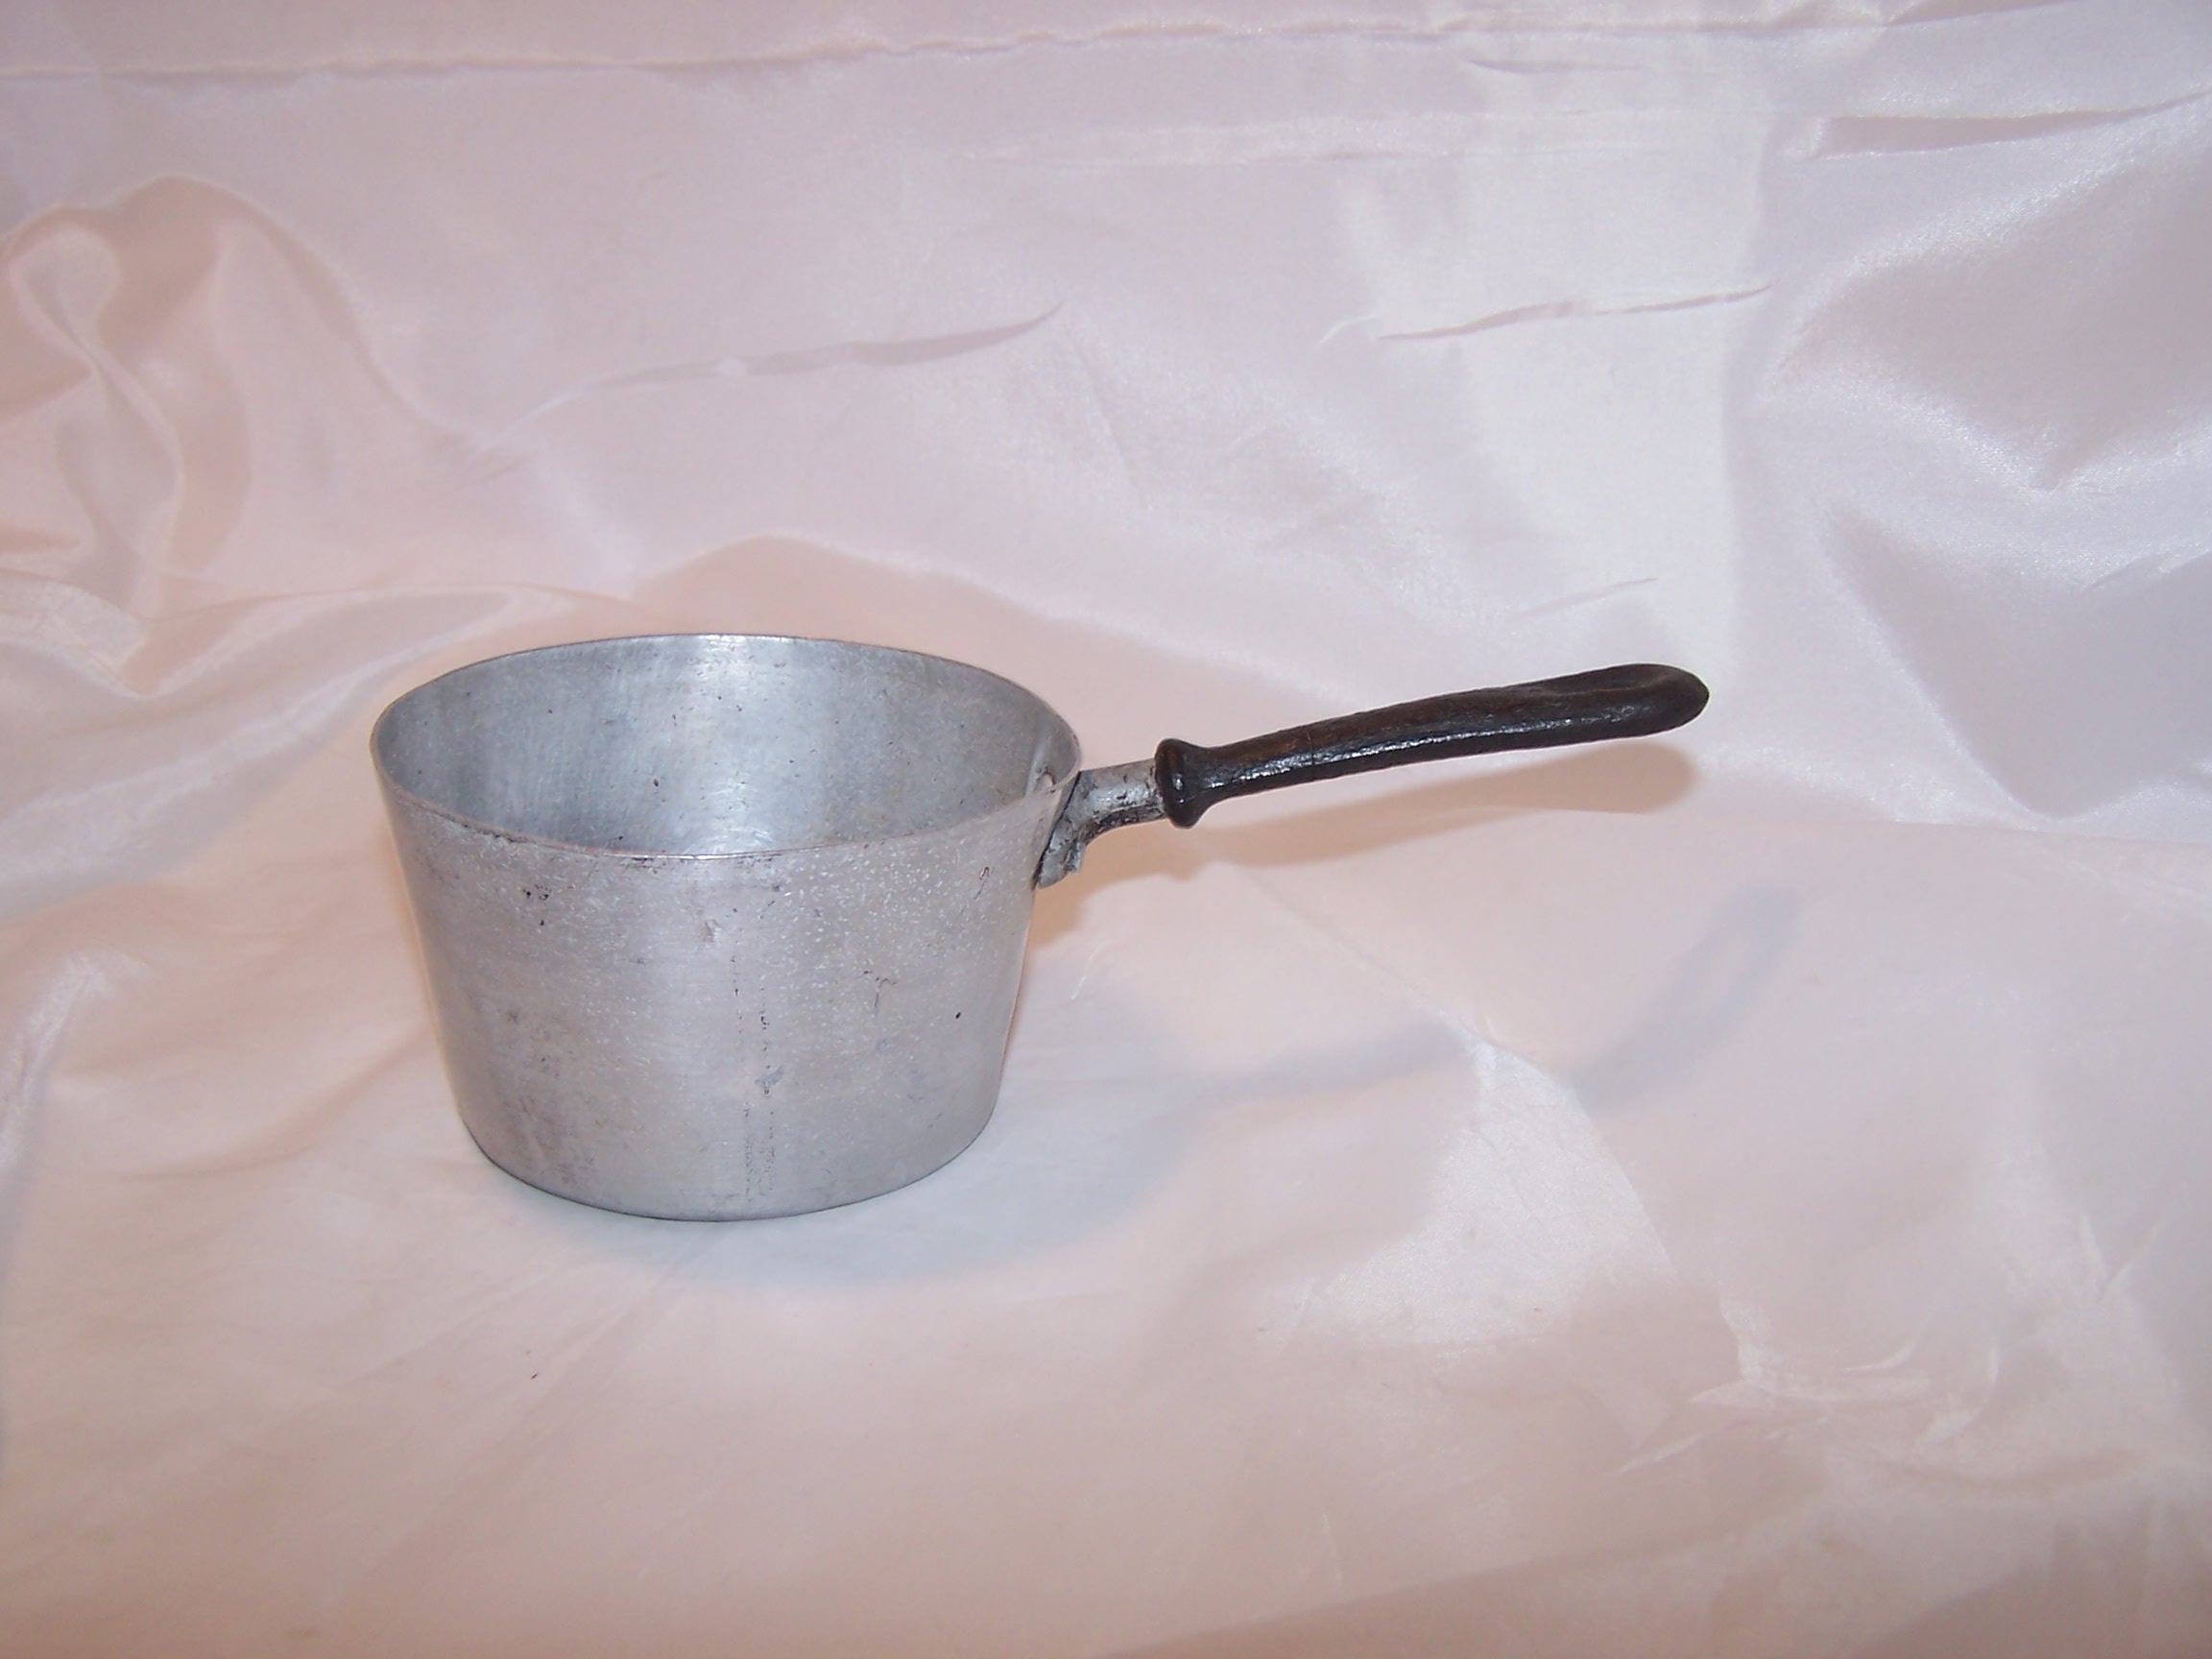 Image 2 of Toy Cook Pot, Aluminum, Vintage Childs Toy